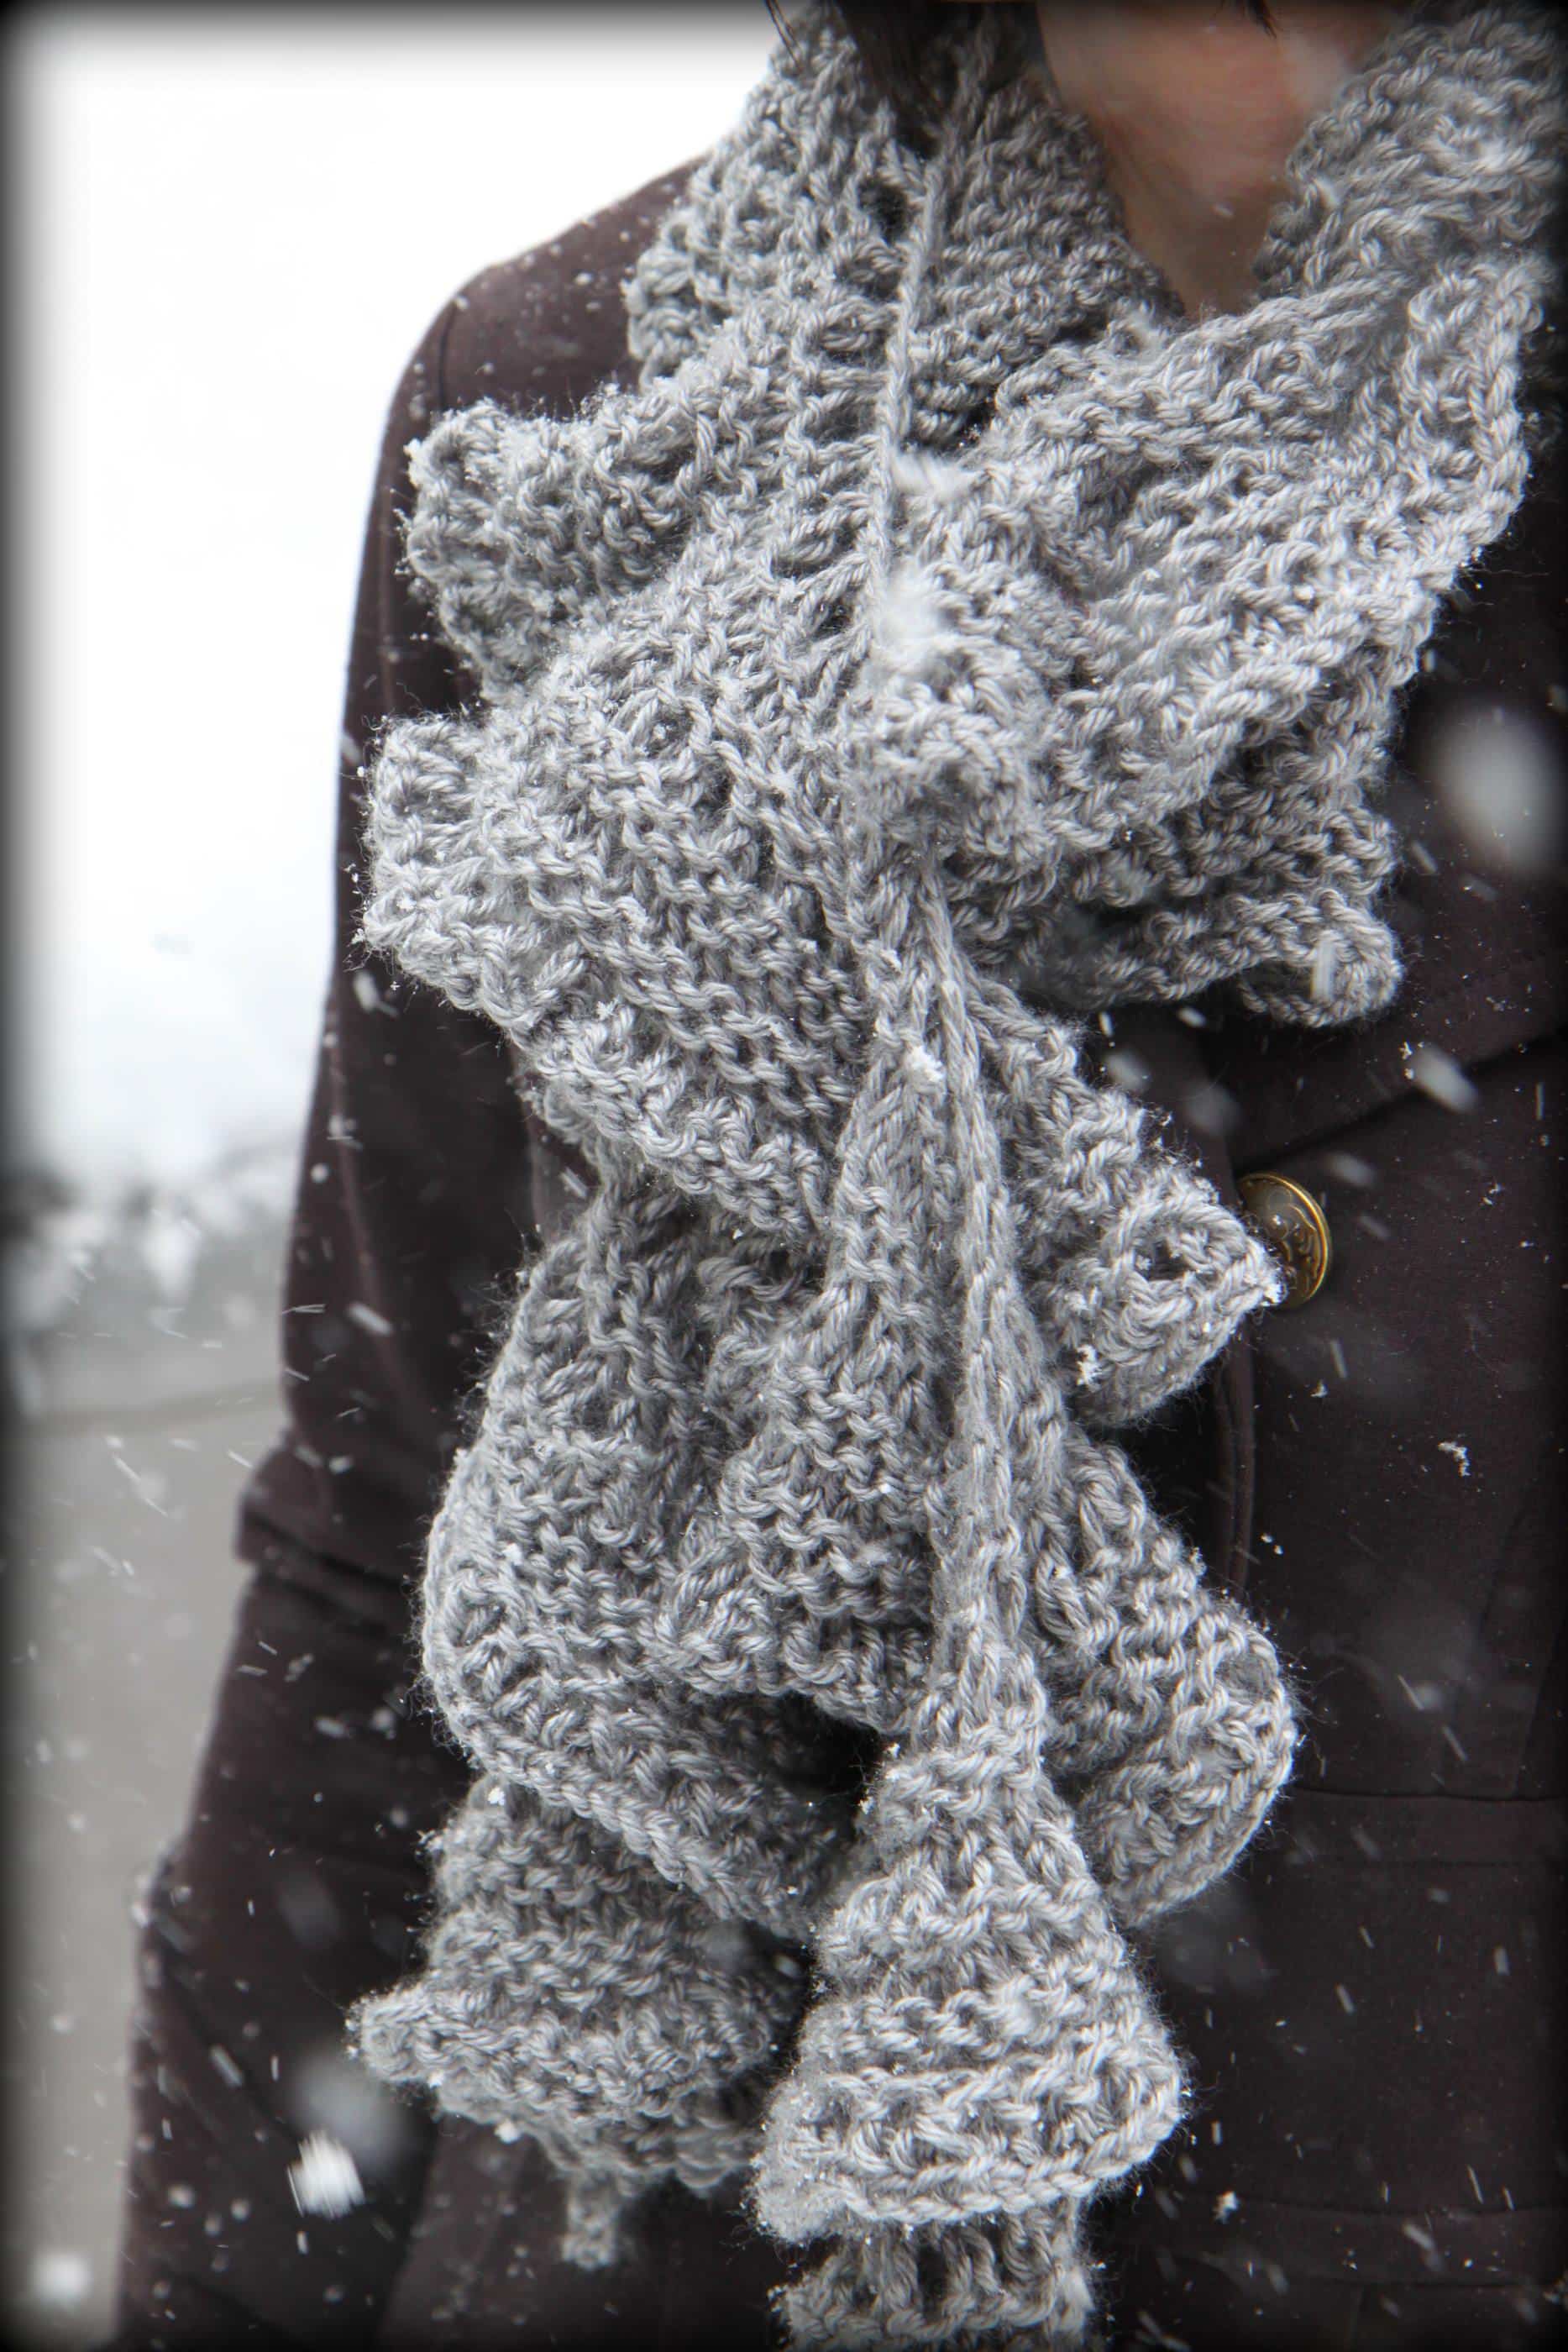 Pam Powers Ruffled and Ruched Scarf Knitting Pattern + FREE SHIPPING!